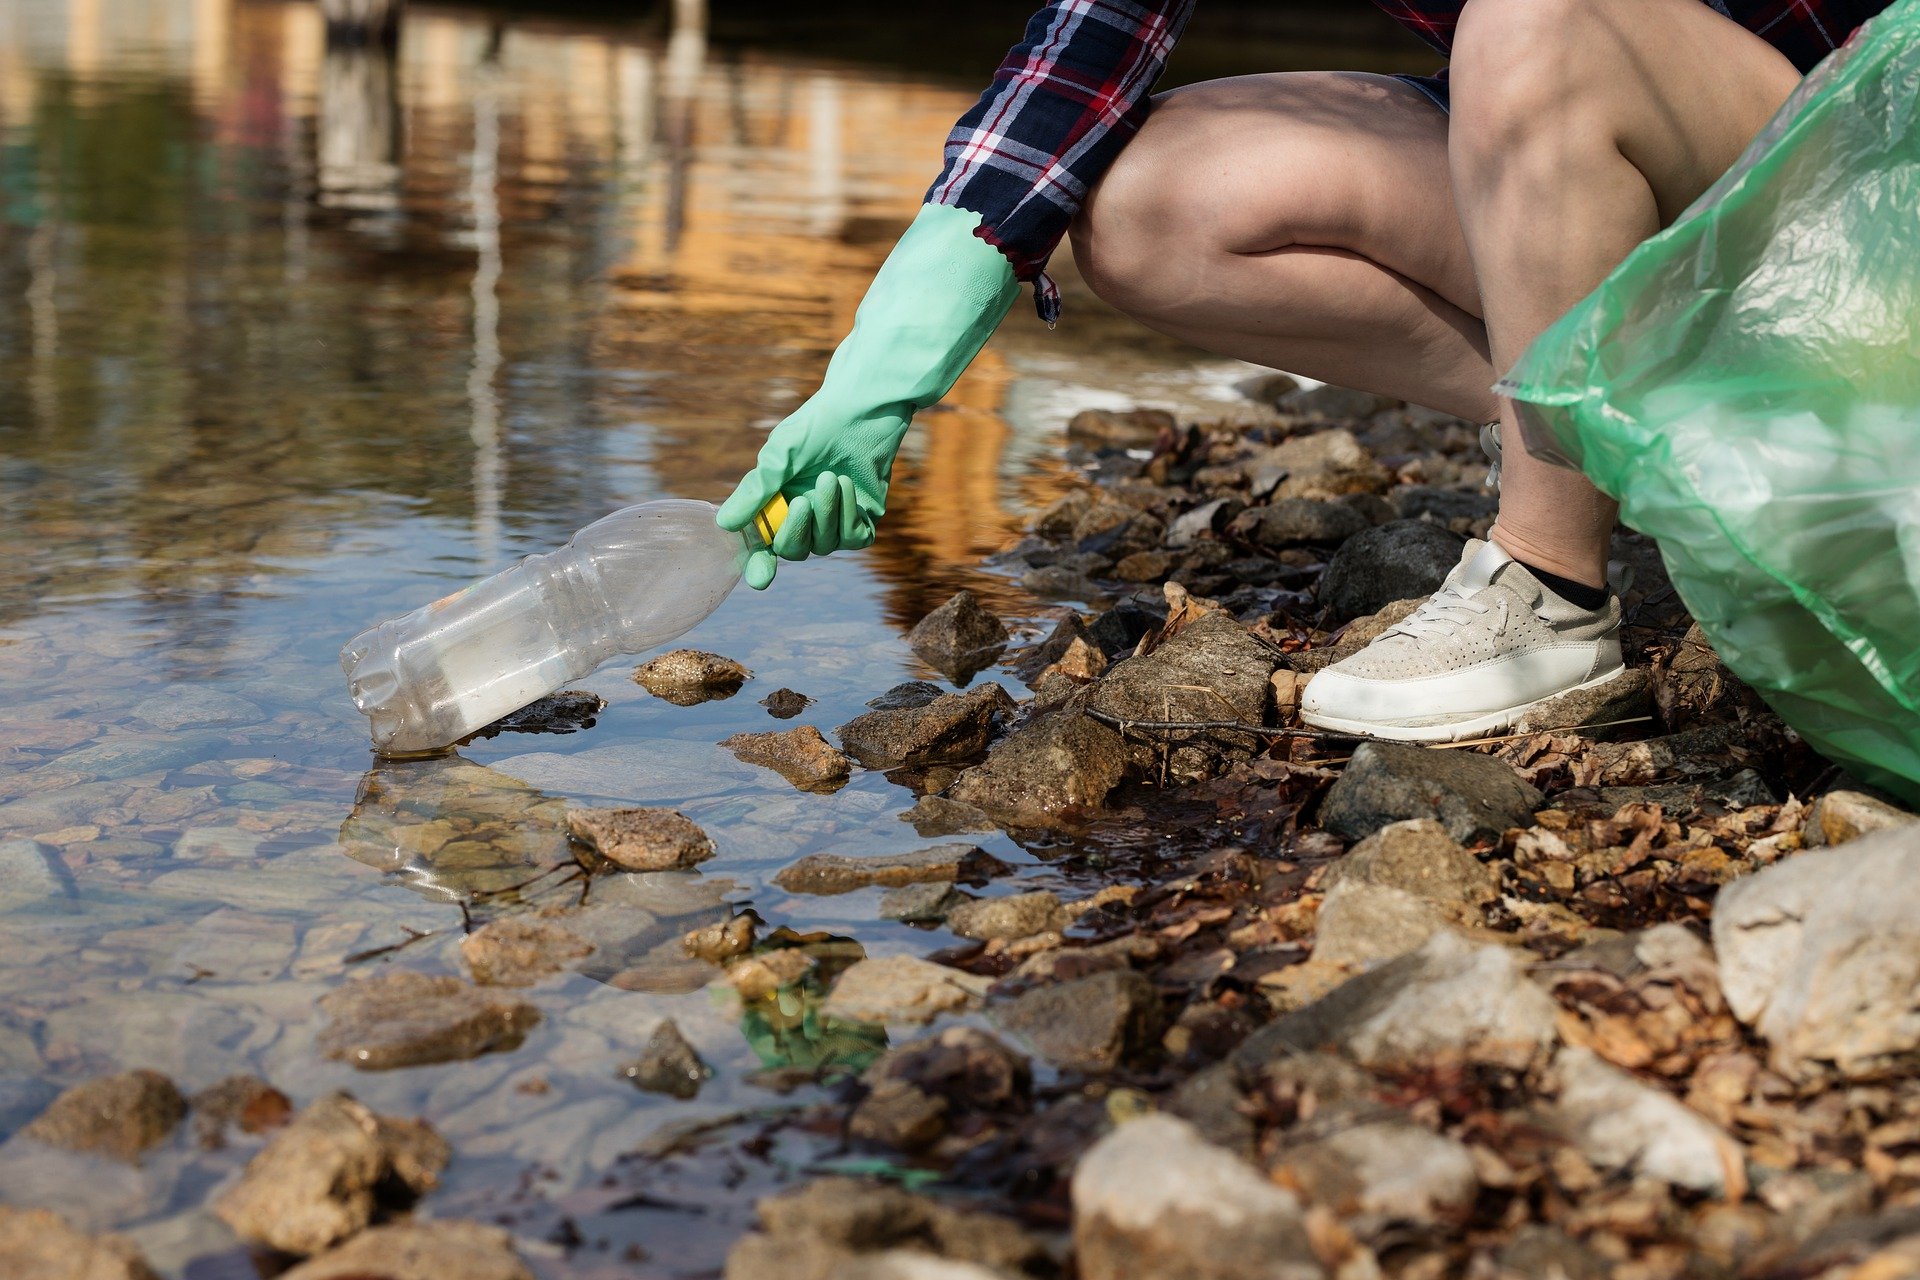 images shows legs of someone knelt down taking out a bottle from the edge of a stream wearing shorts, sneakers, green rubber gloves and a trashbag